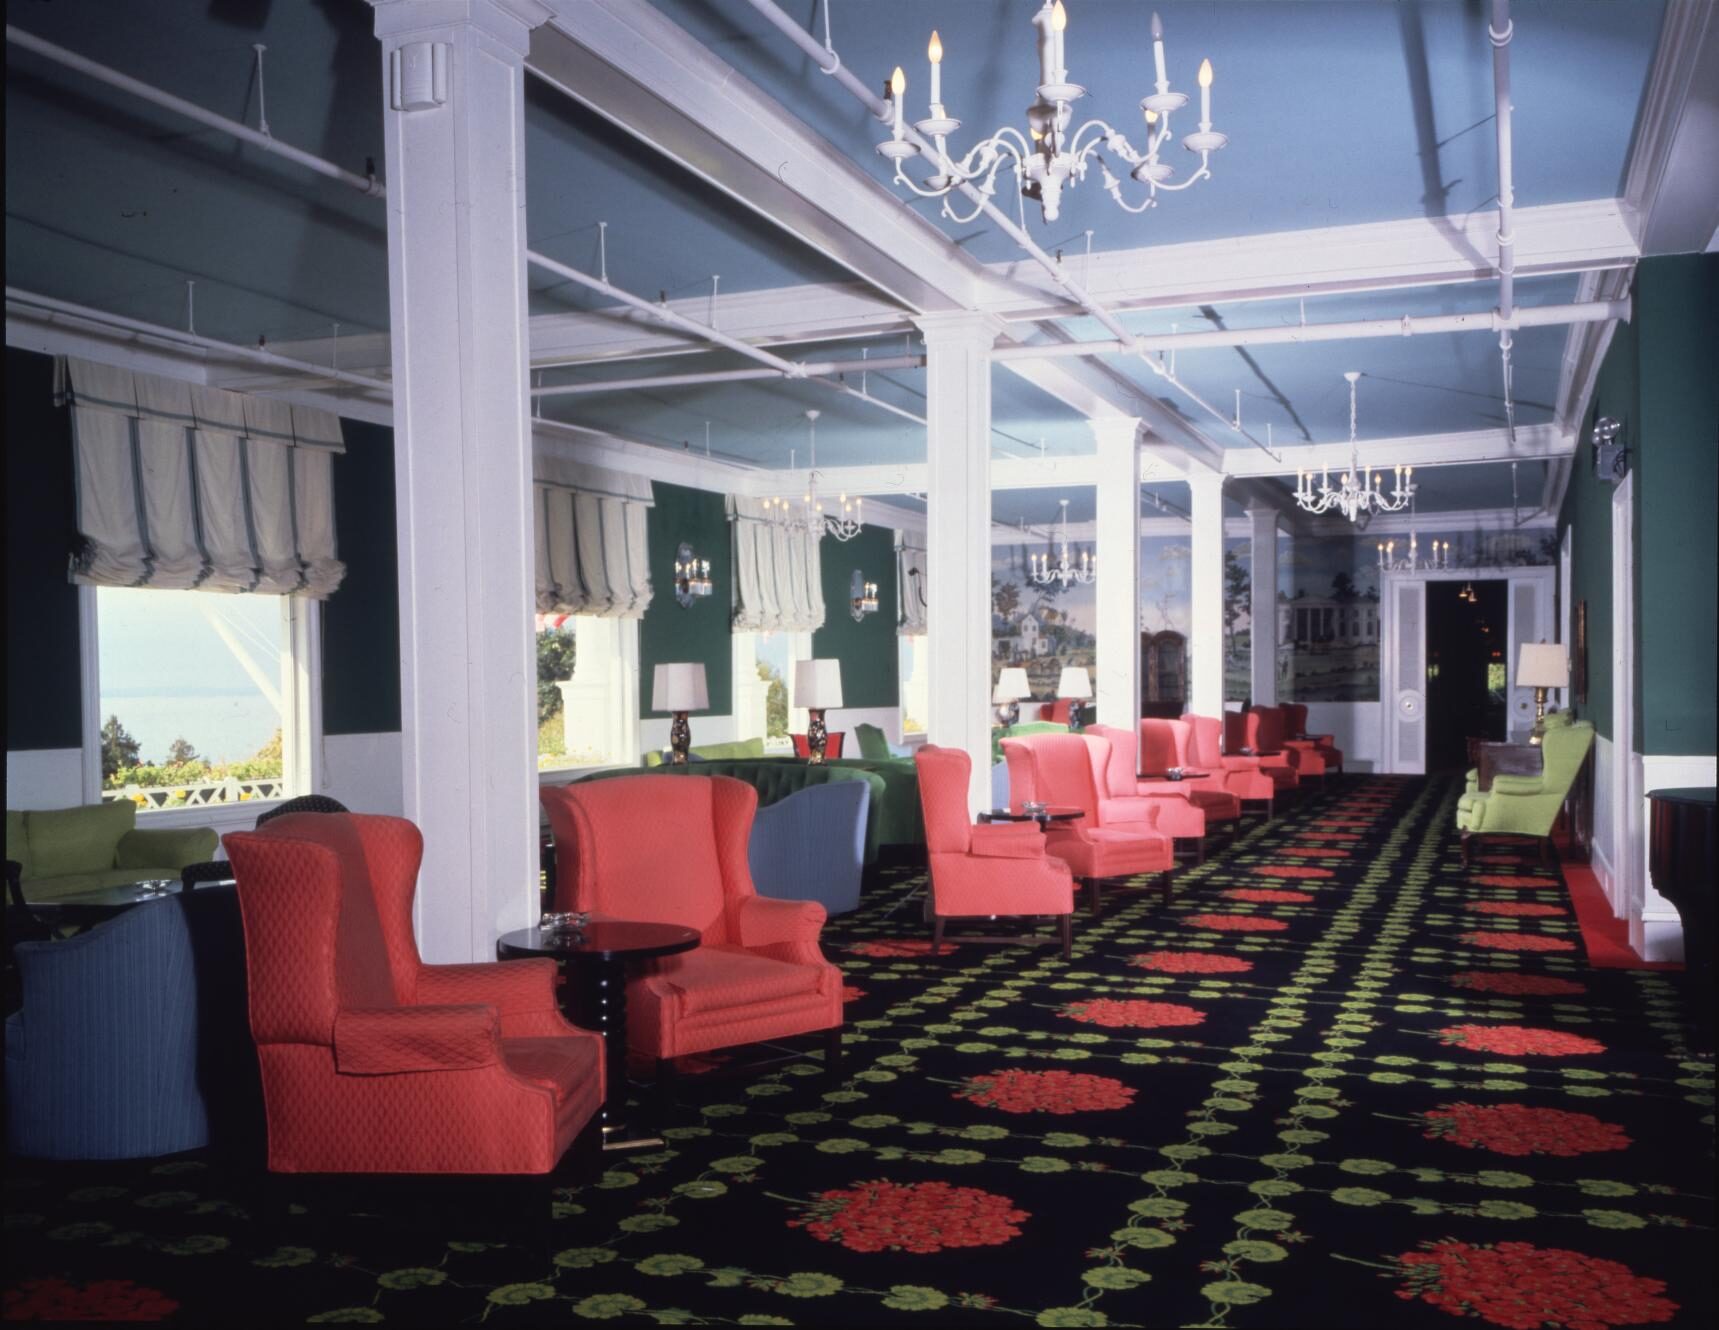 Photo of hotel interior with long row of red armchairs.